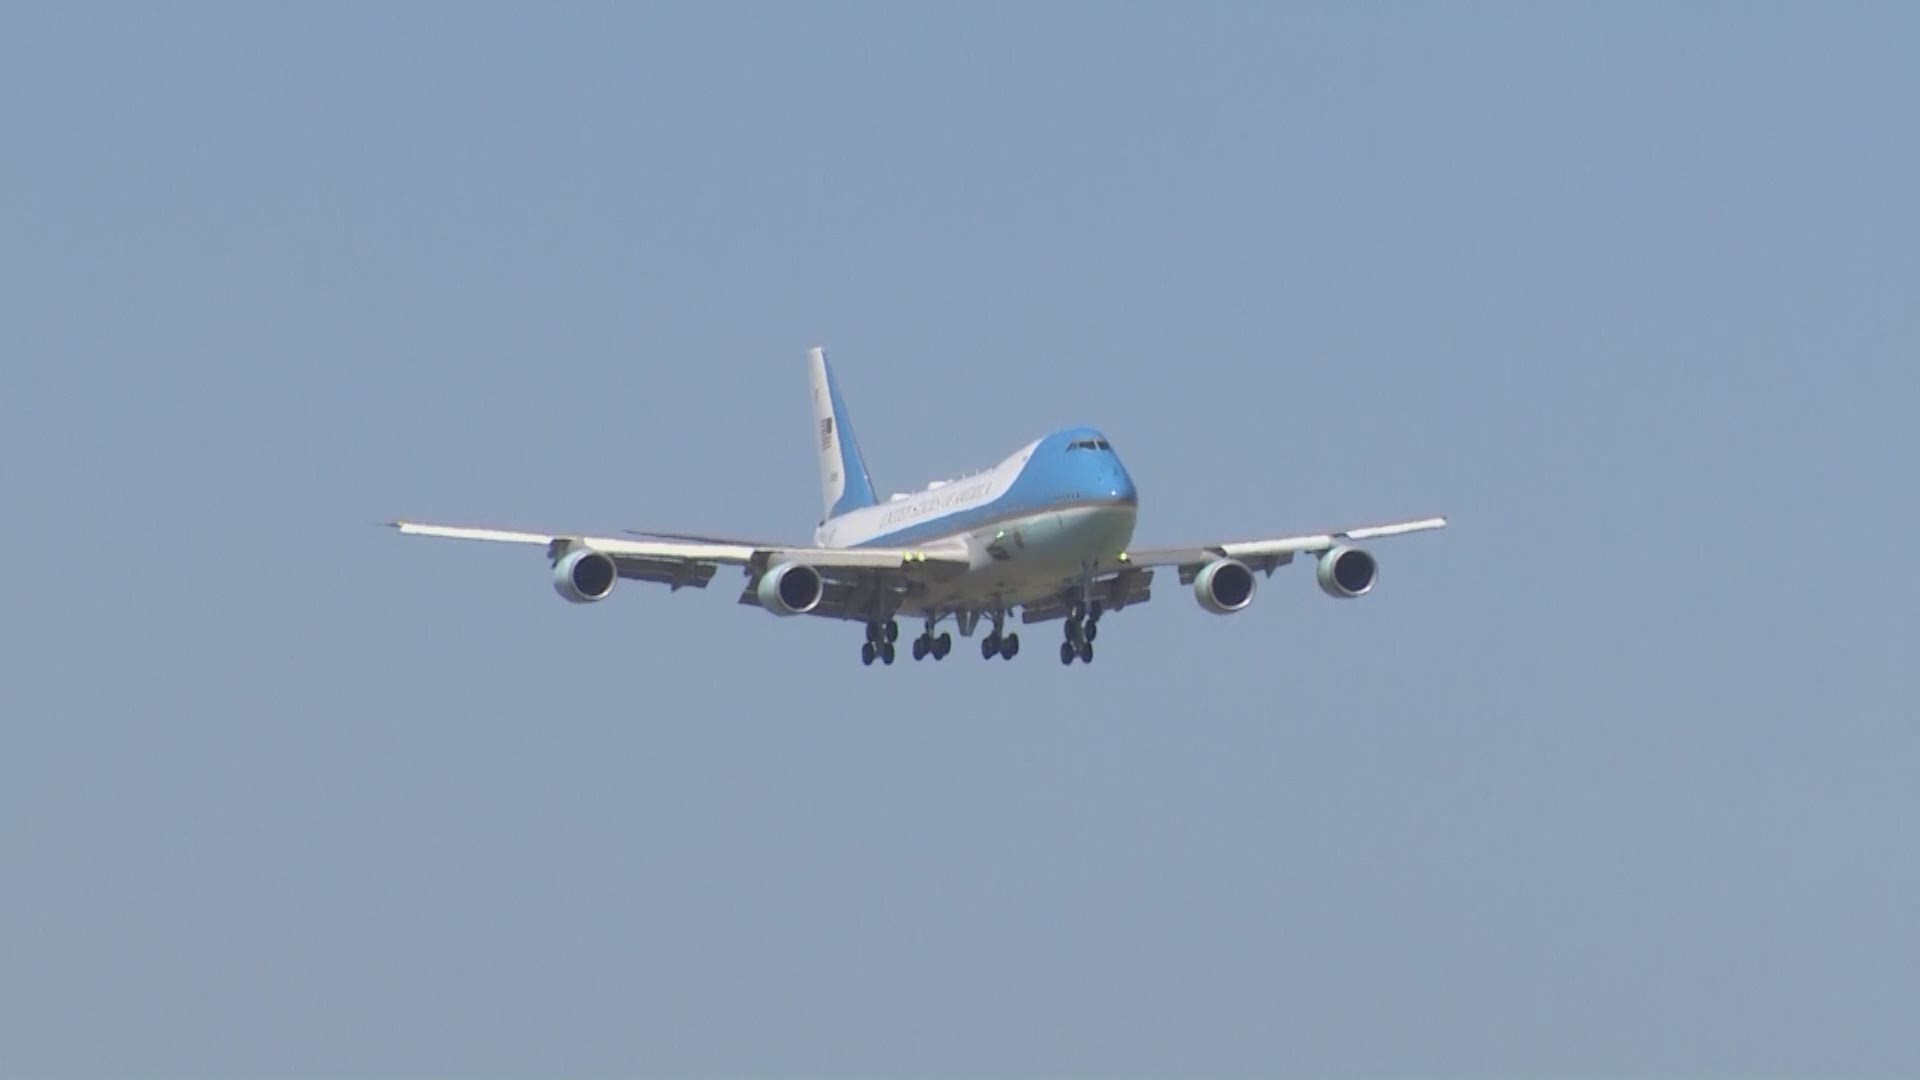 President Donald Trump arrived at Ellington Field just before 3 p.m. Wednesday ahead of his visit to Crosby.